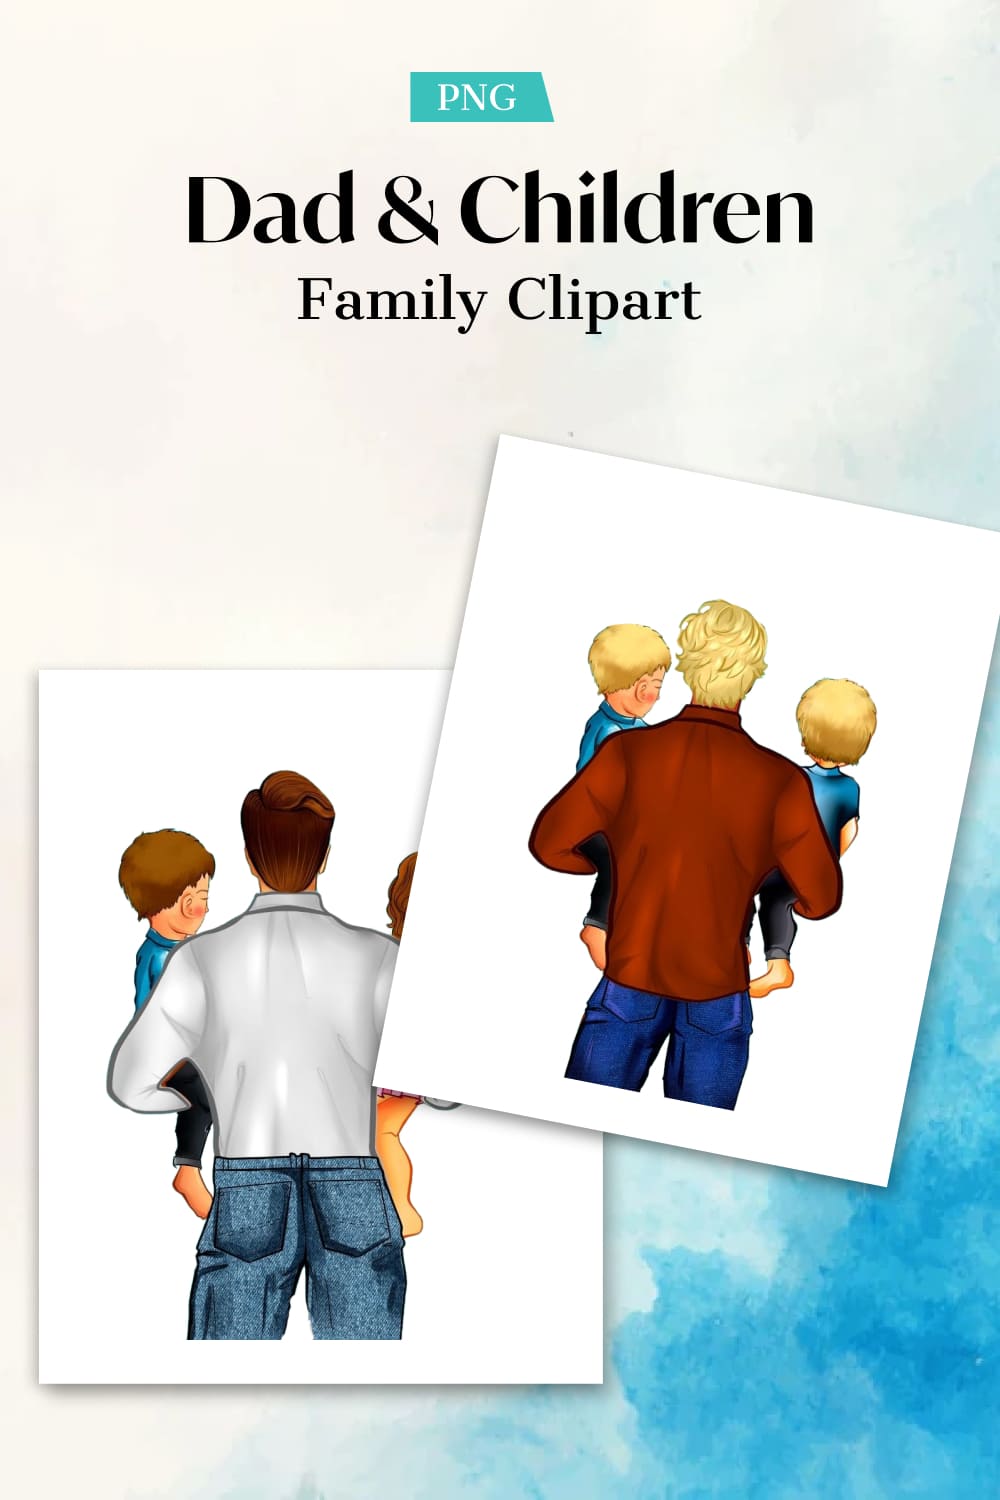 Two cards of family clipart.